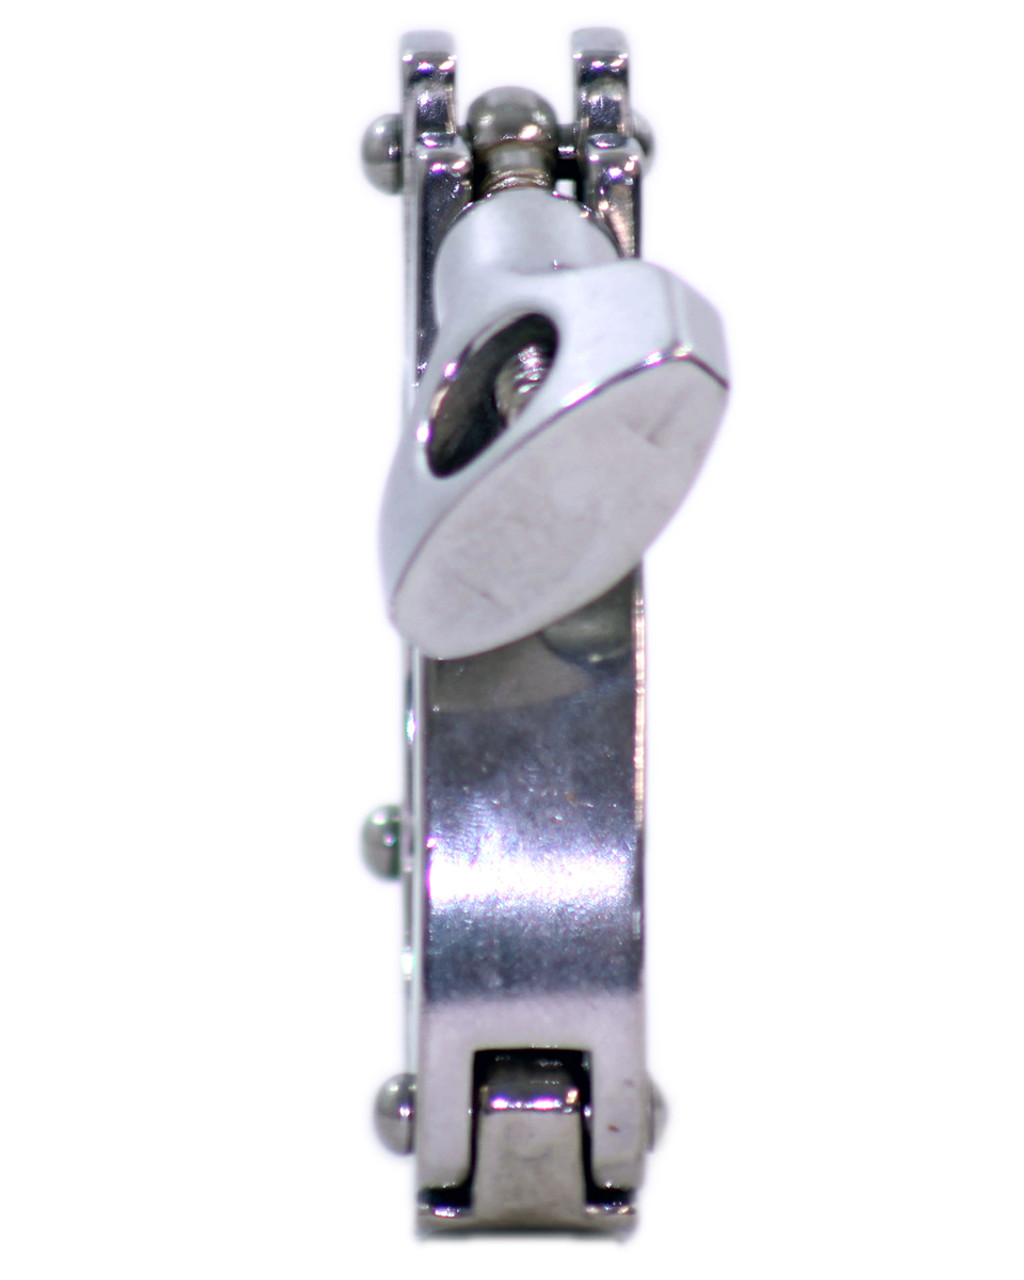 VNE 13MHHS Heavy Duty Clamp Material: Sanitary Stainless Steel Diameter: 2-1/2 Inch 3 Piece